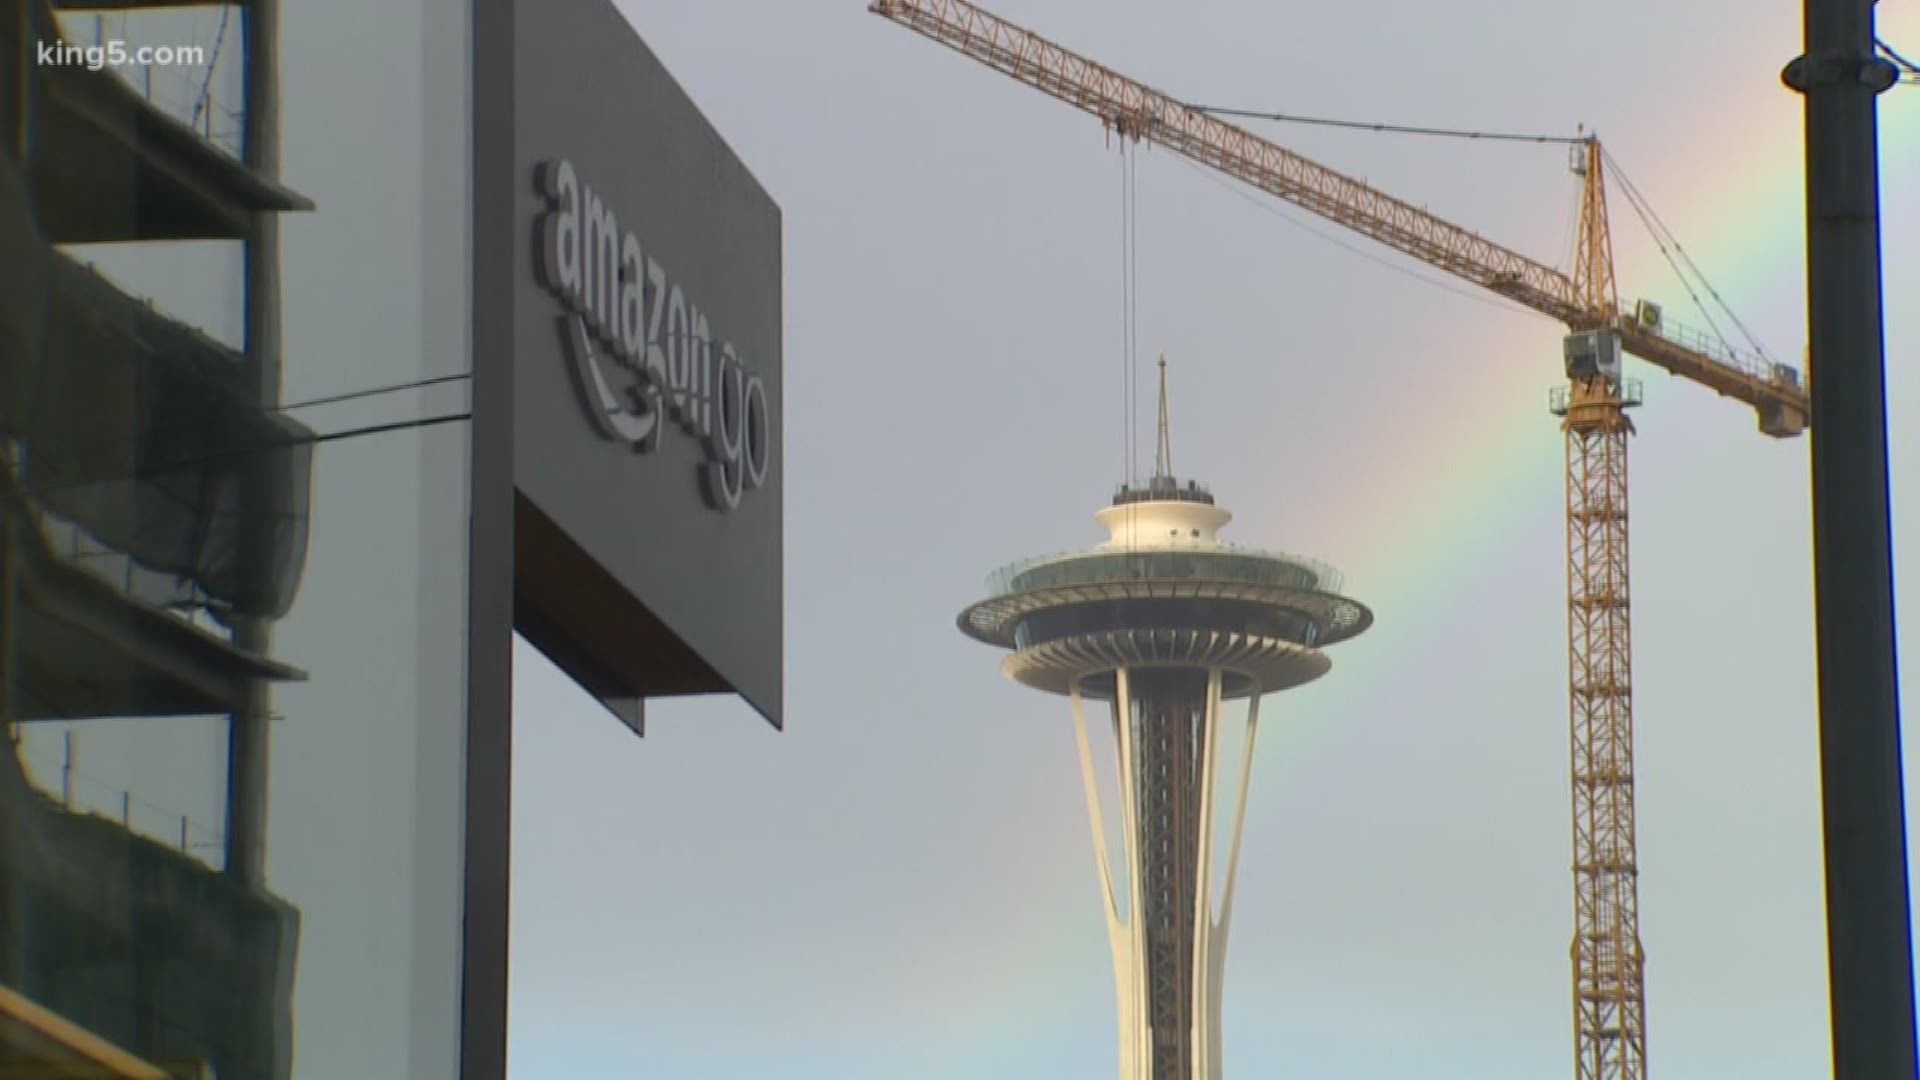 Seattle's Department of Ethics and Elections heard arguments Wednesday concerning the big money coming into this year's election cycle, from the likes of Amazon.